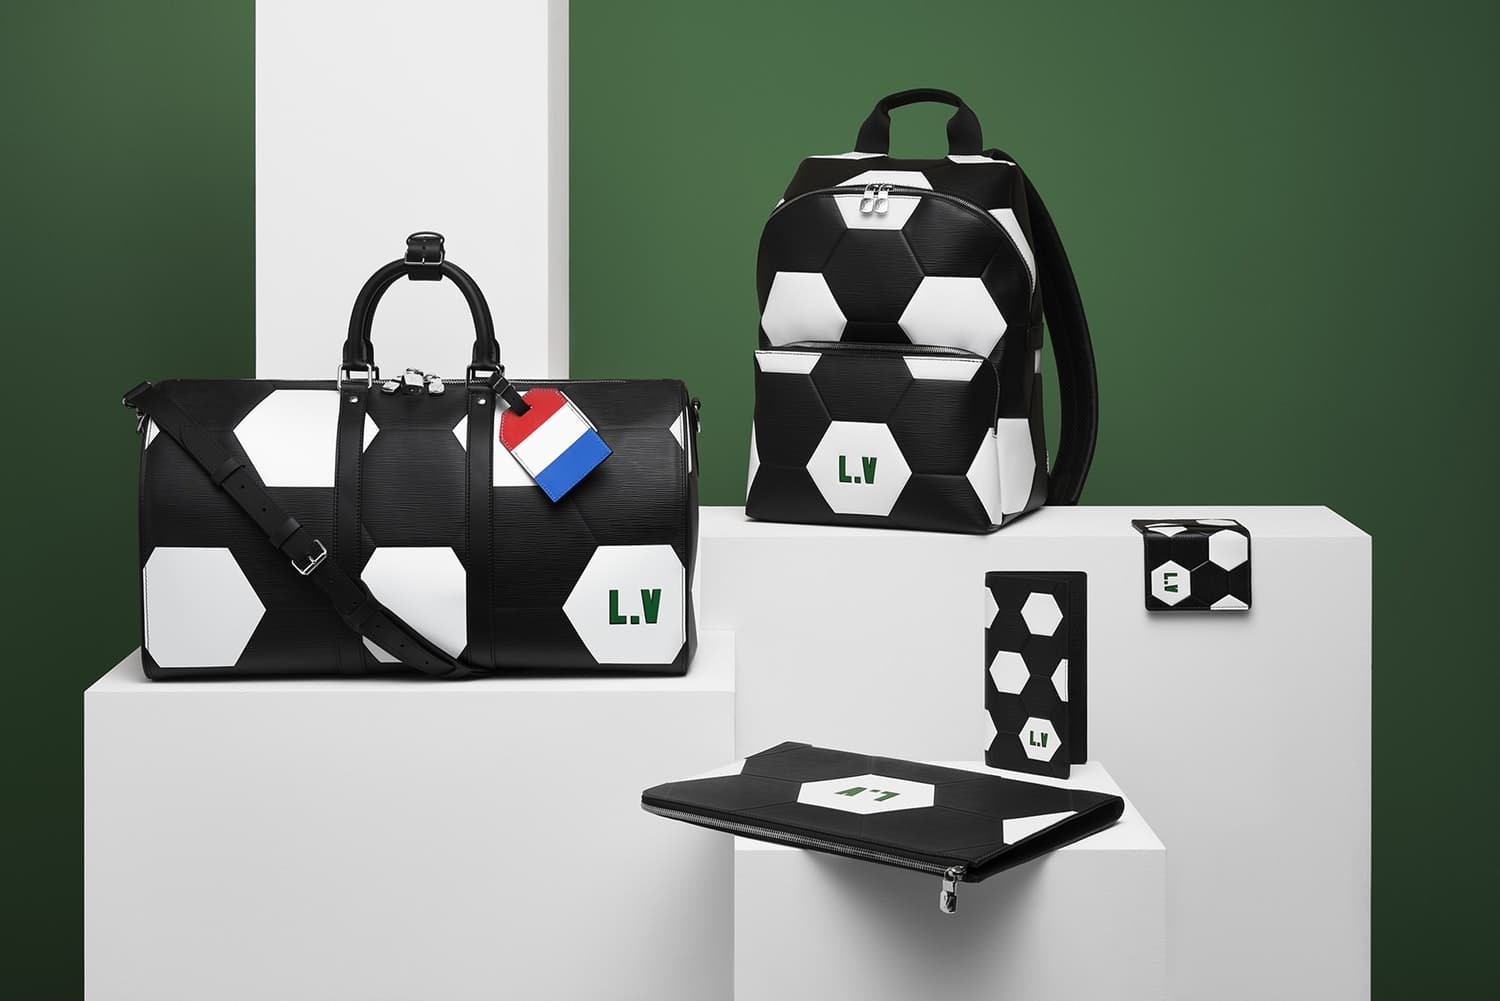 FIFA x Louis Vuitton 2018 World Cup Leather Accessories